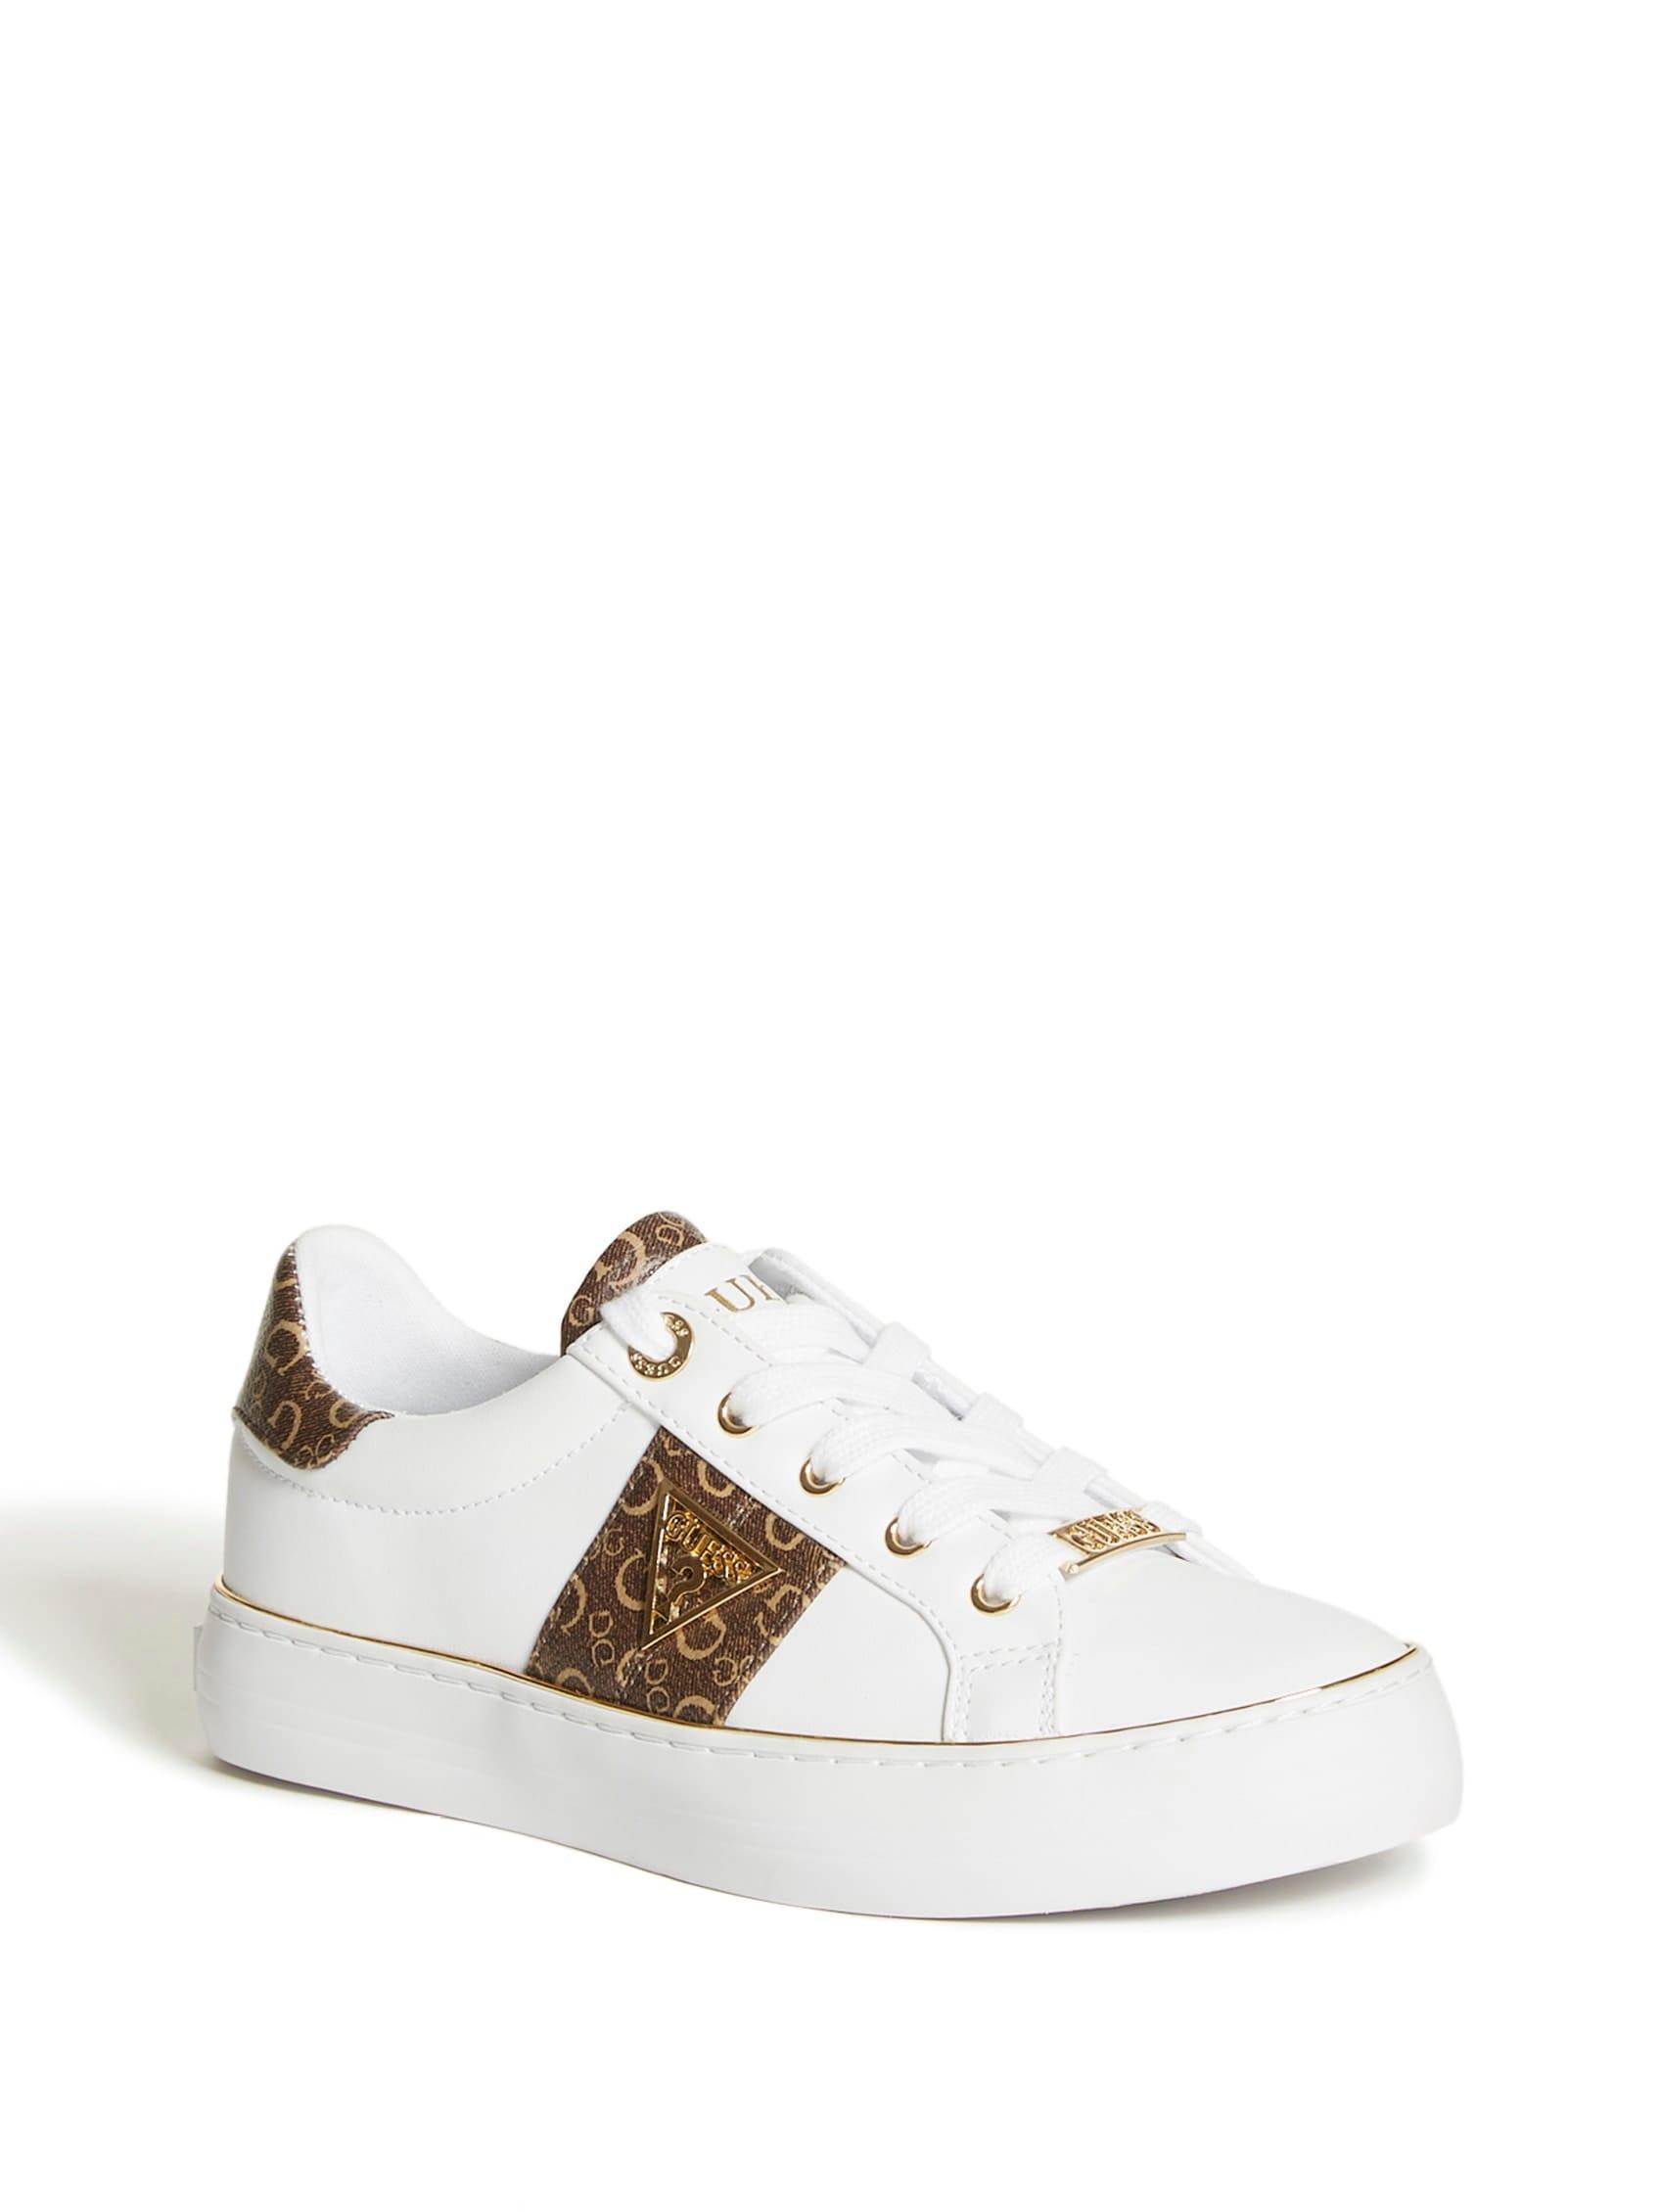 Guess Factory Gwinne Low-top Sneakers in White | Lyst